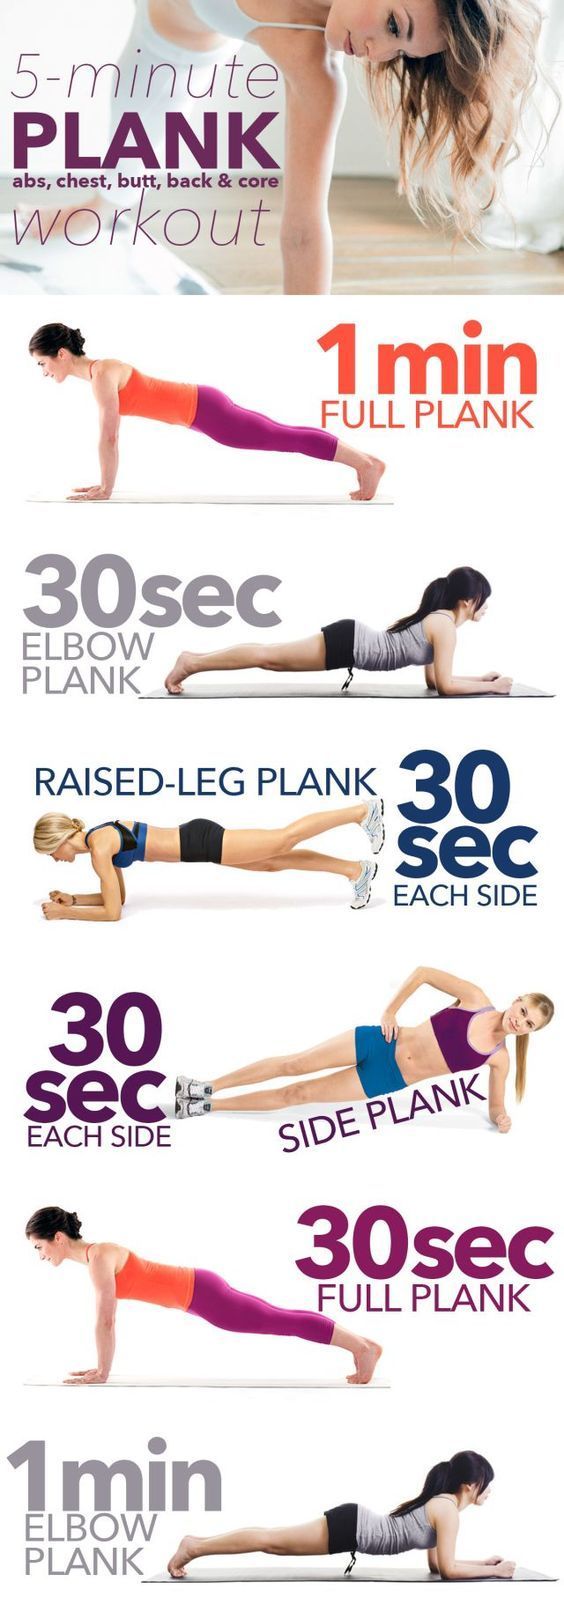 9 Amazing Flat Belly Workouts To Help Sculpt Your Abs! -   18 flat belly inspiration
 ideas